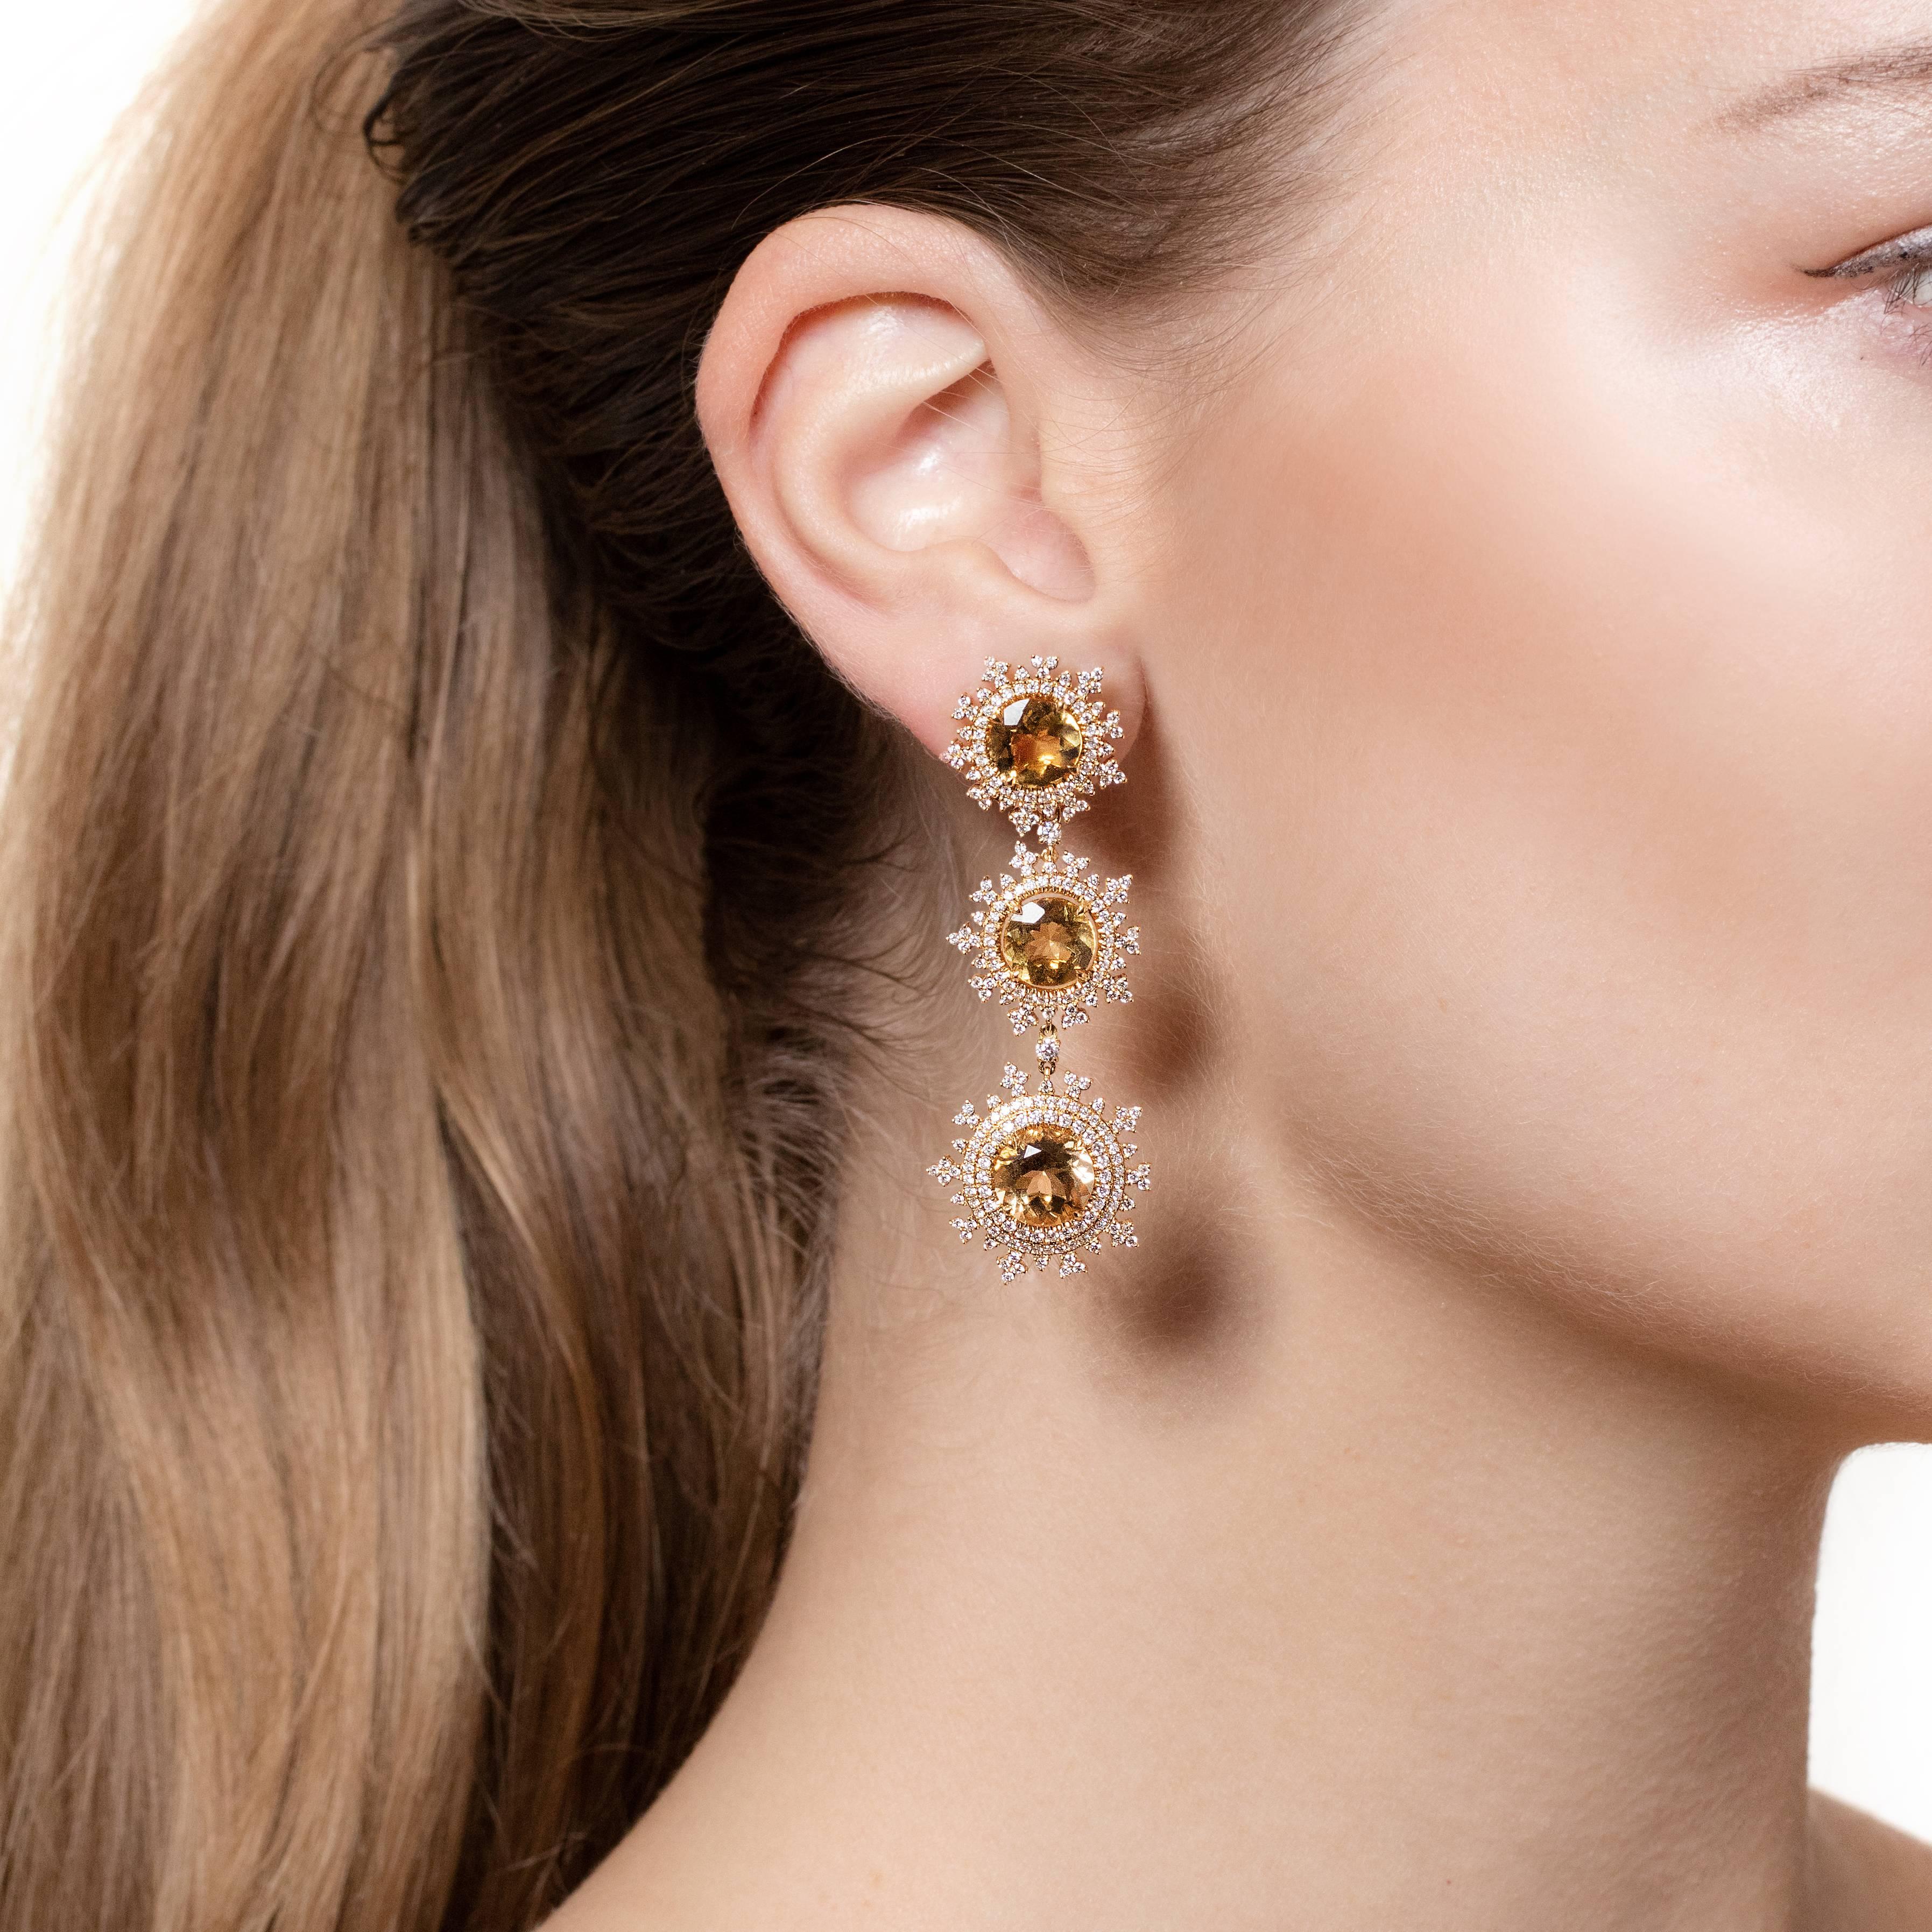 A stunning pair of long detachable flake earrings that are made from 18ct. yellow gold with 3 yellow beryl stones on each earring that are surrounded by 520 diamonds. They are part of Nadine Aysoy’s Tsarina Collection where nature is an incredible